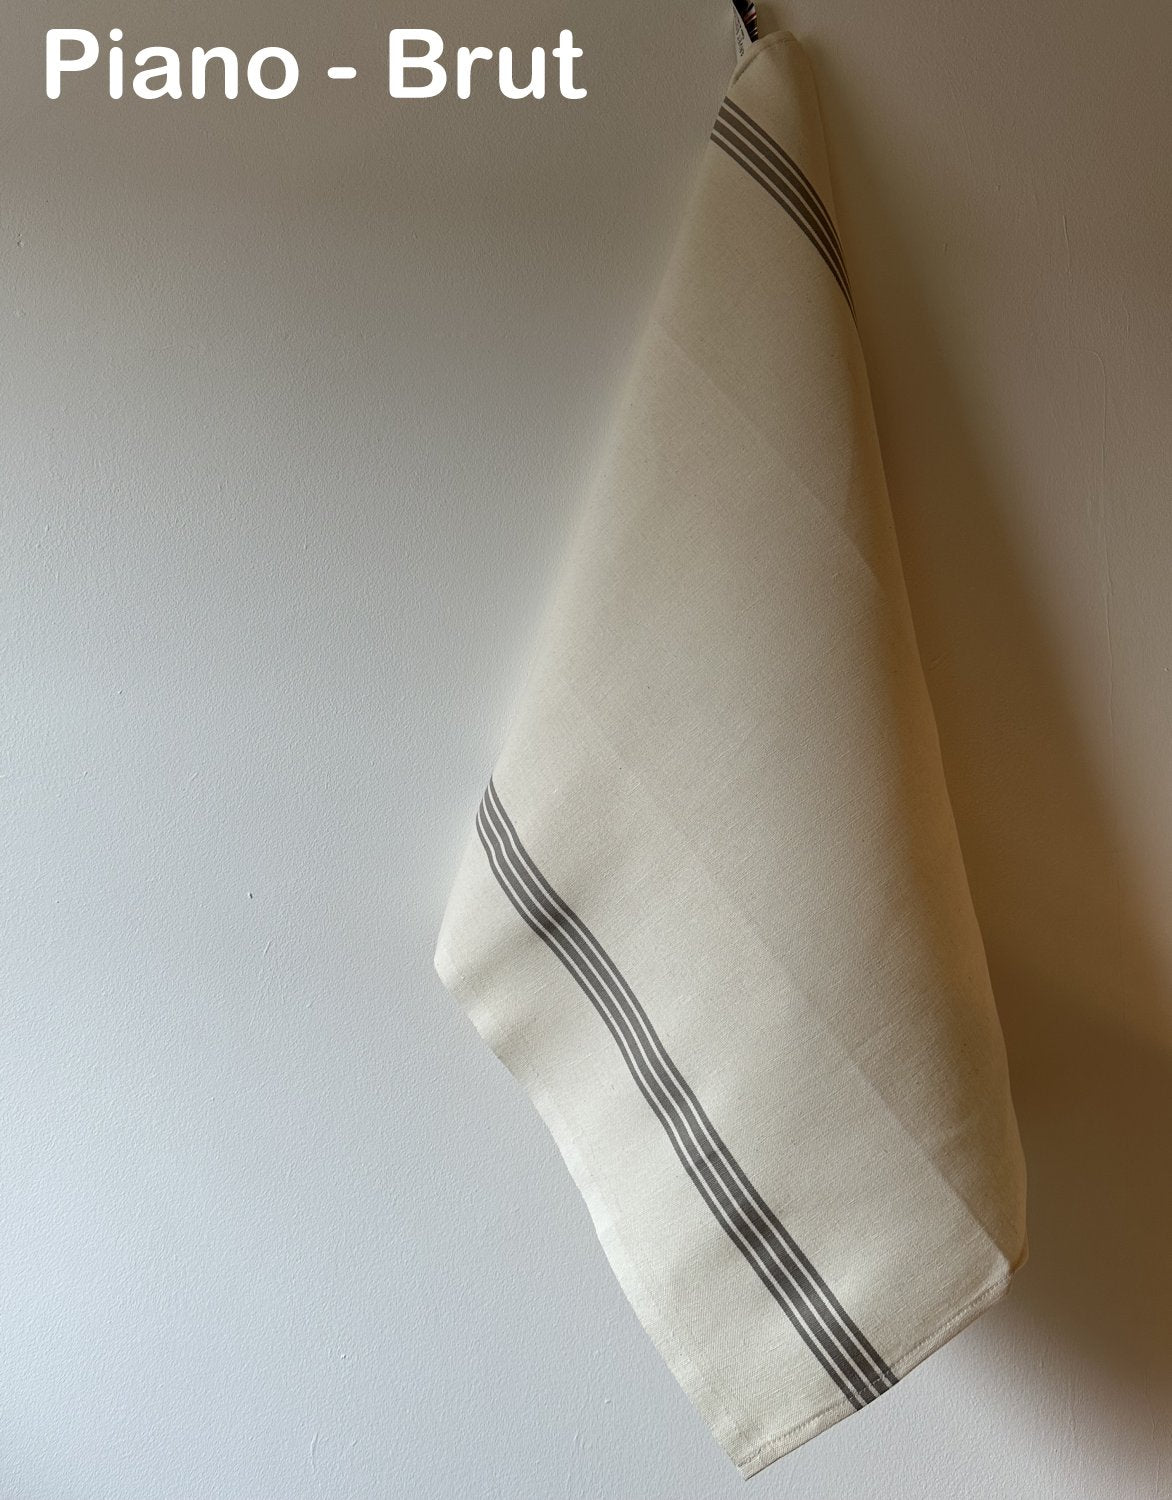 Charvet Editions "Piano" (Linen), Woven linen union tea towel. Made in France.